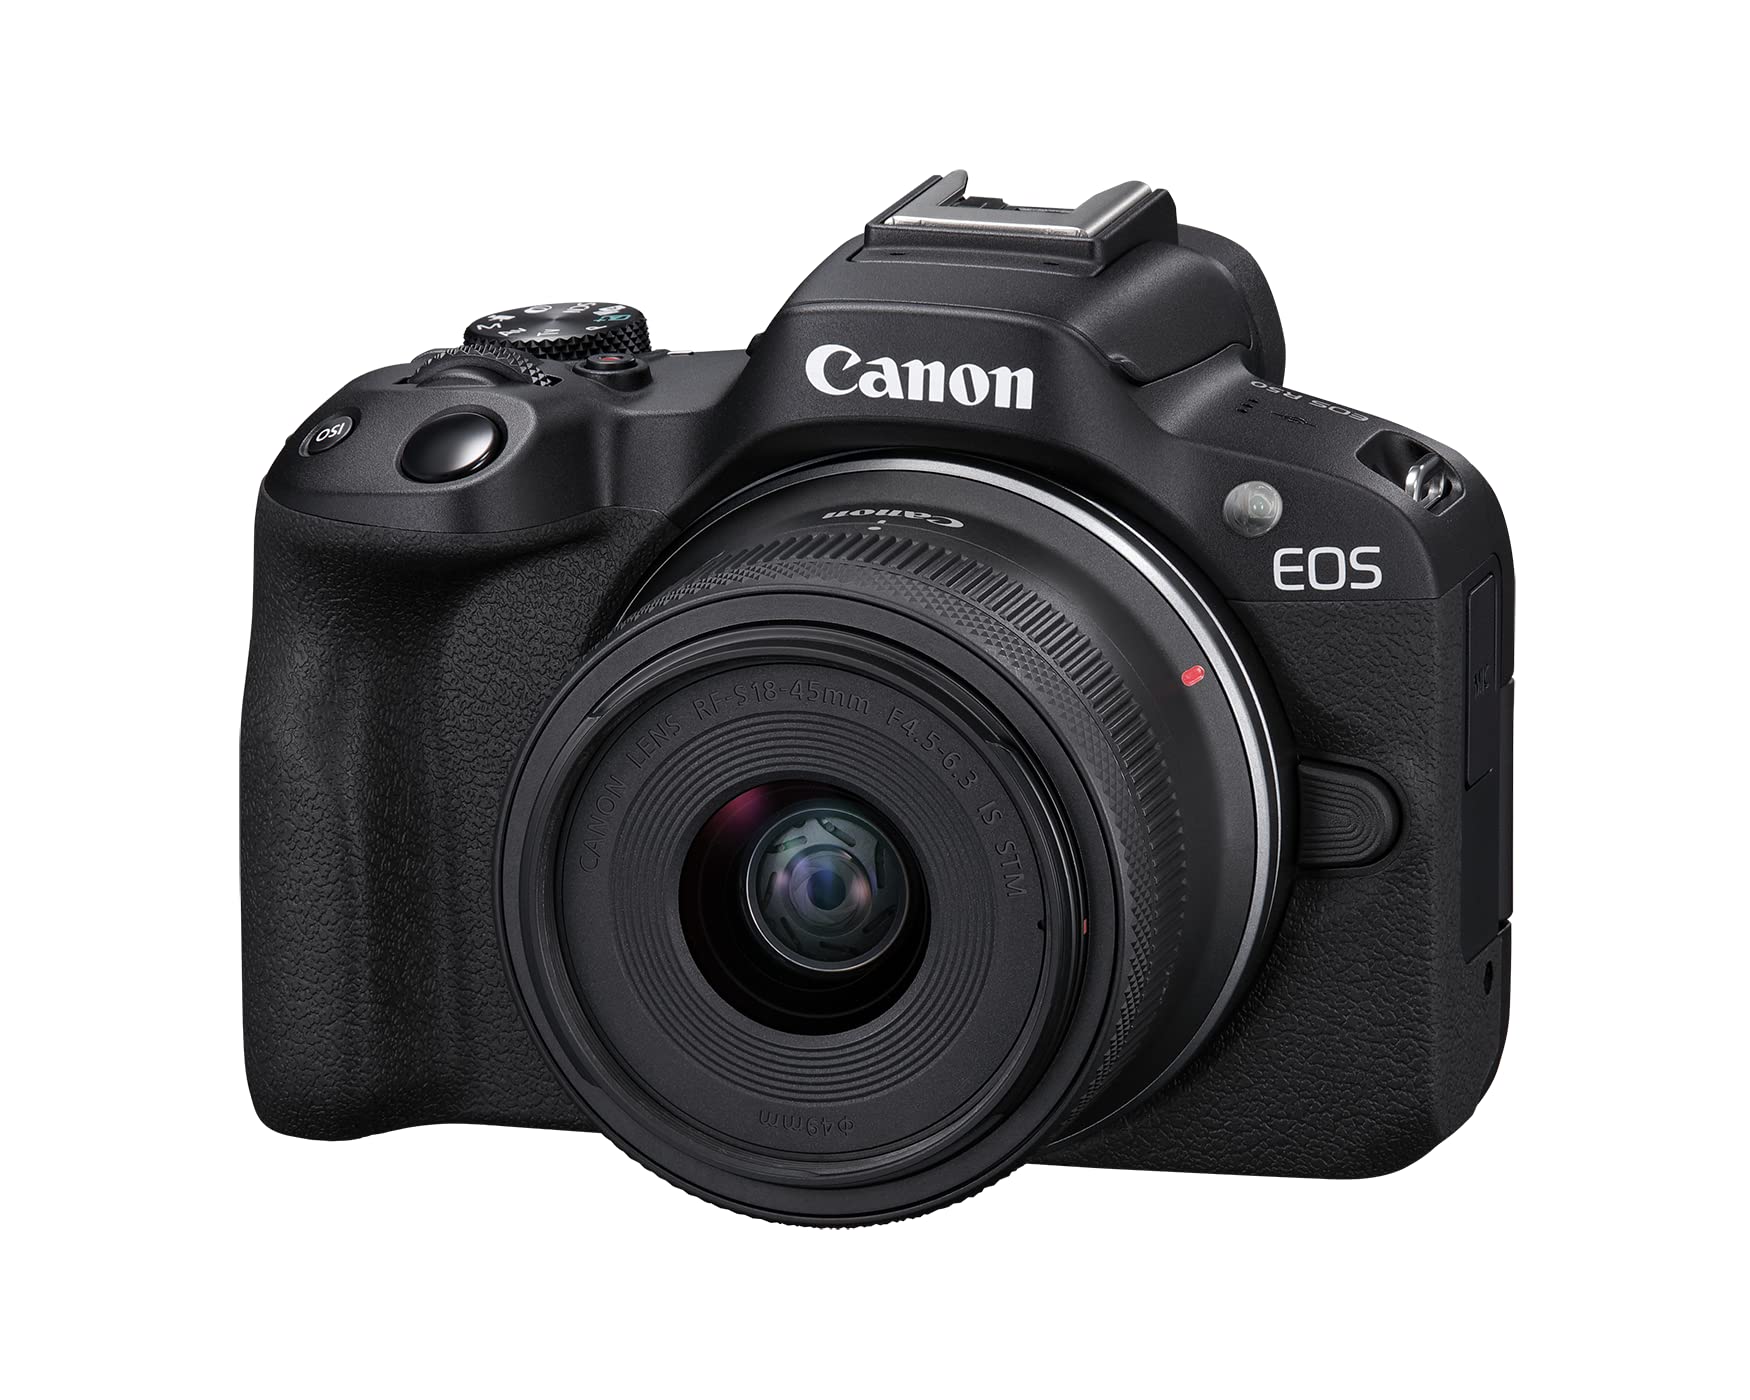 Canon EOS R50 Content Creator Kit, Mirrorless Vlogging Camera, 24.2 MP, 4K Video, DIGIC X Image Processor, RF-S18-45mm F4.5-6.3 IS STM Lens, Stereo Microphone, Tripod Grip, Wireless Remote Control